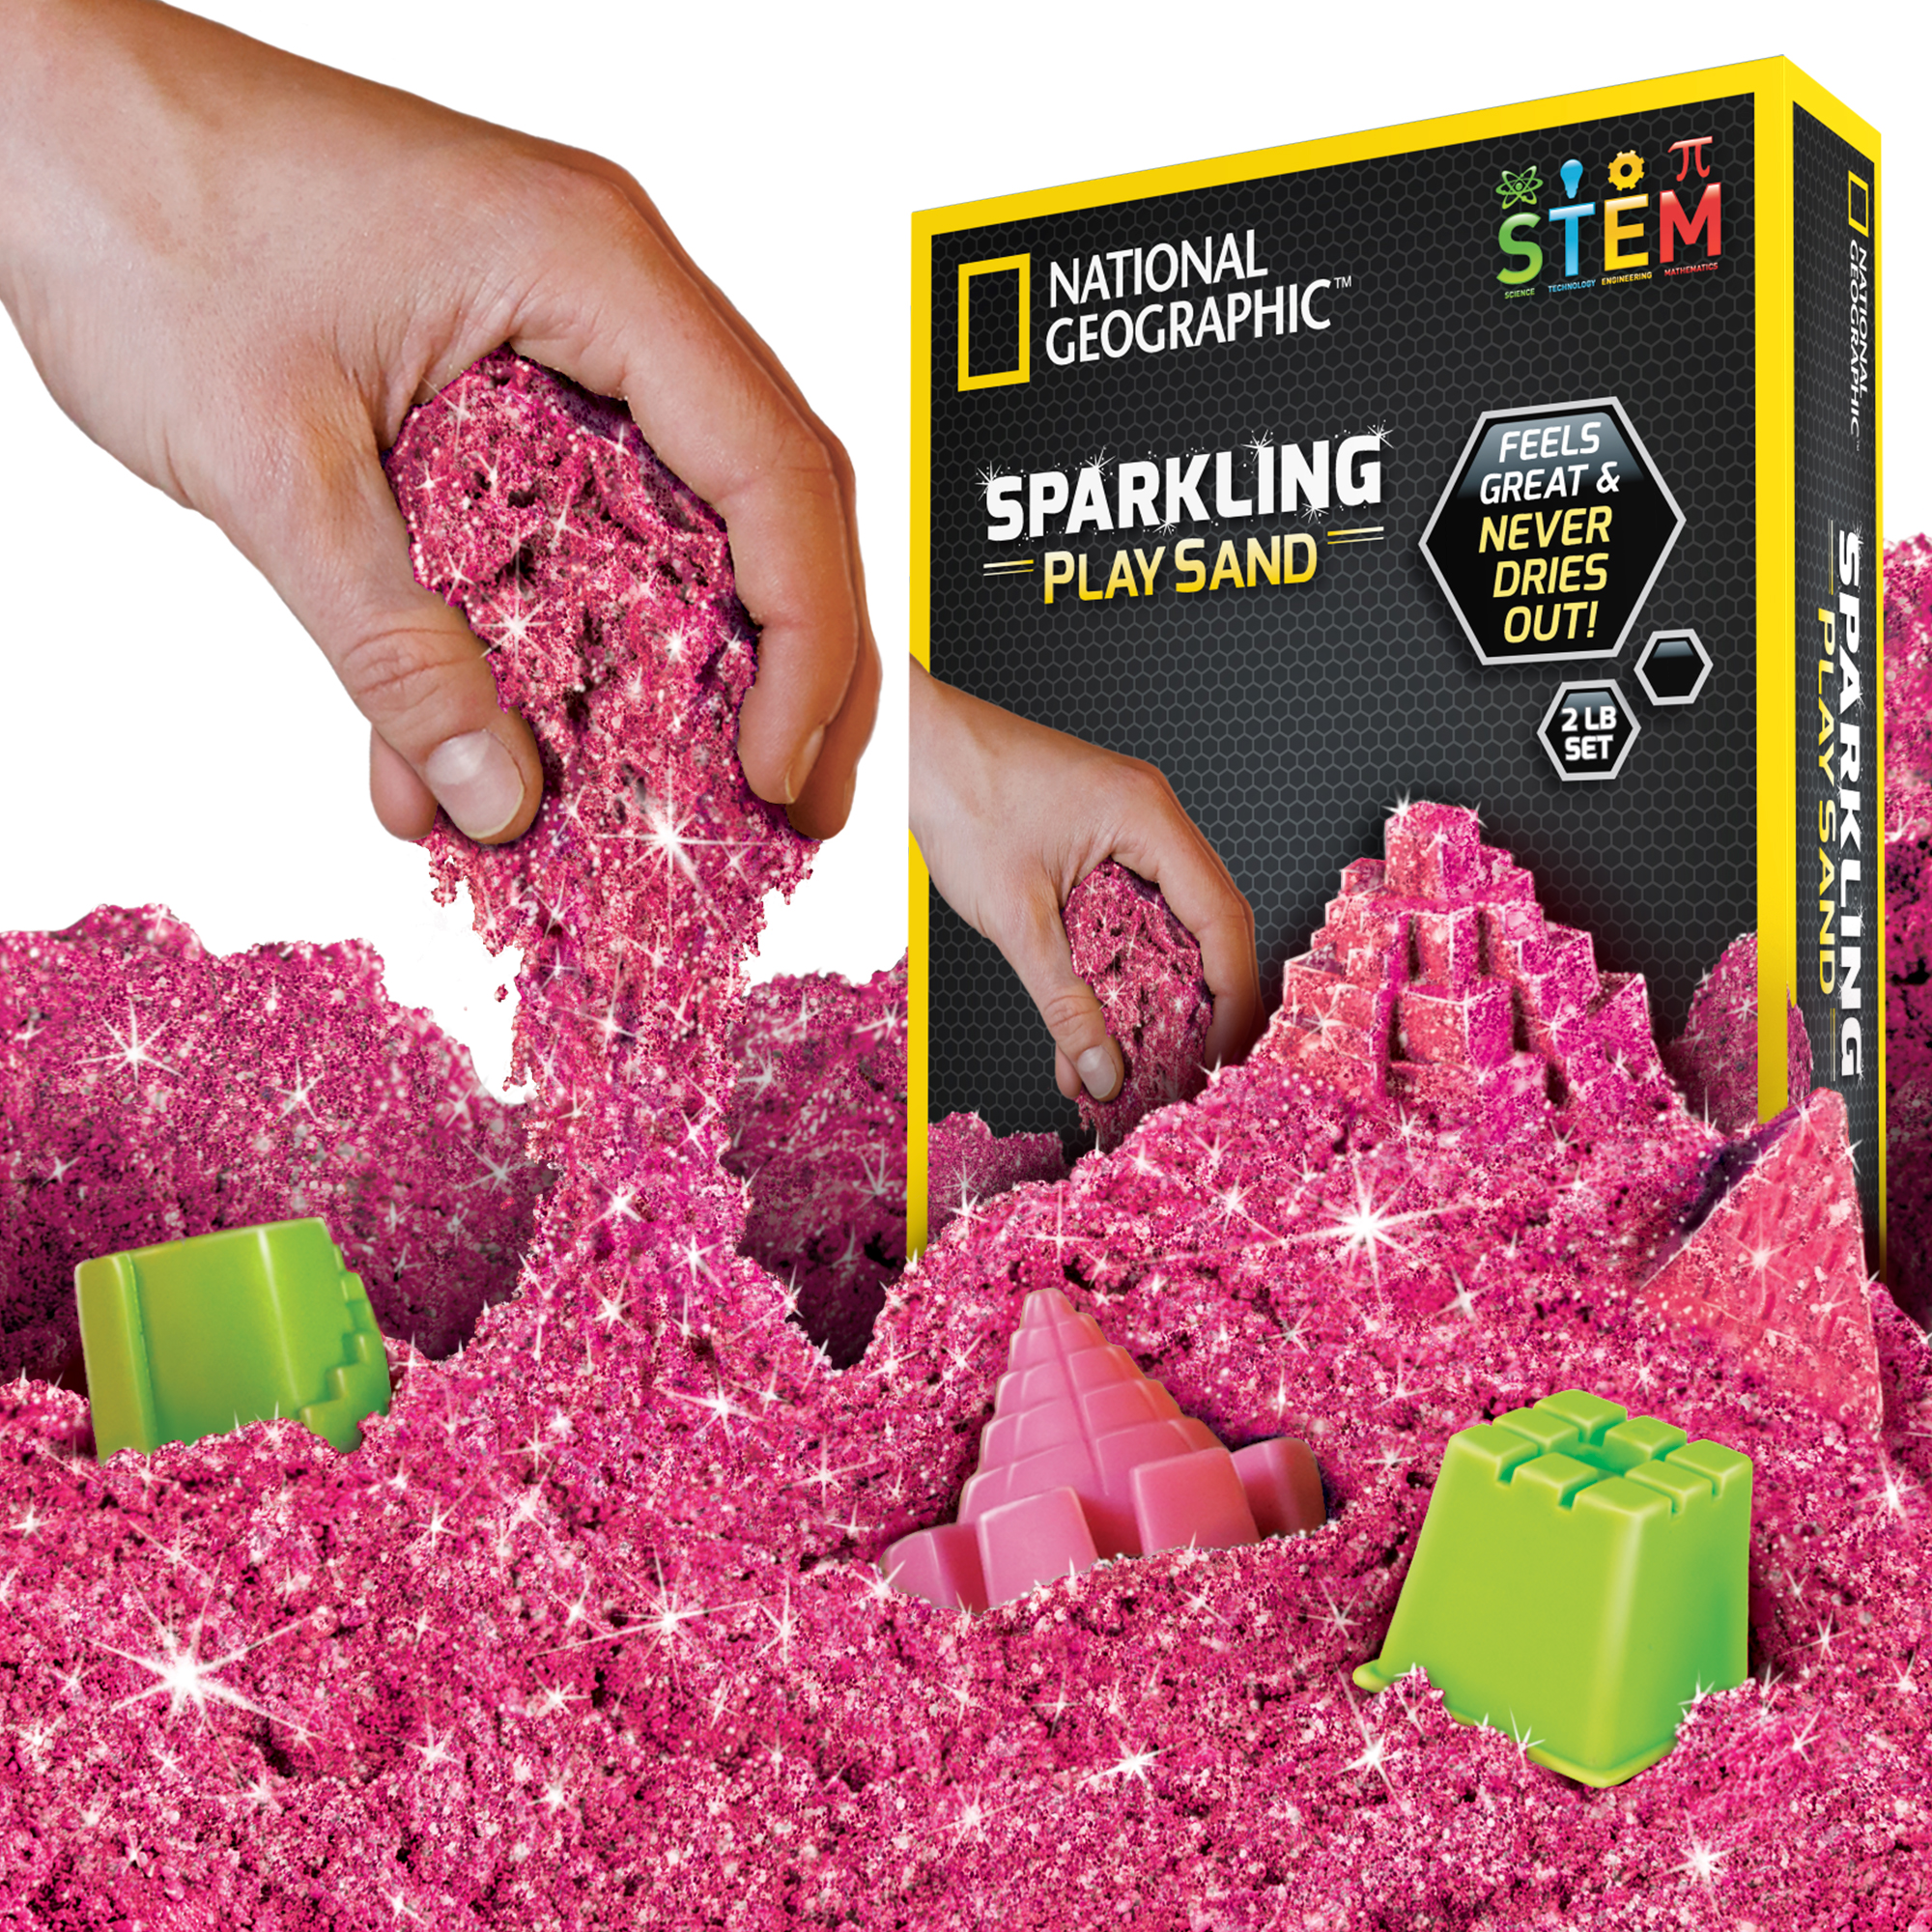 National Geographic Play Sand - 2 lbs of Sand with Castle Molds (Sparkling Pink) - A Fun Sensory Sand Activity - image 1 of 7